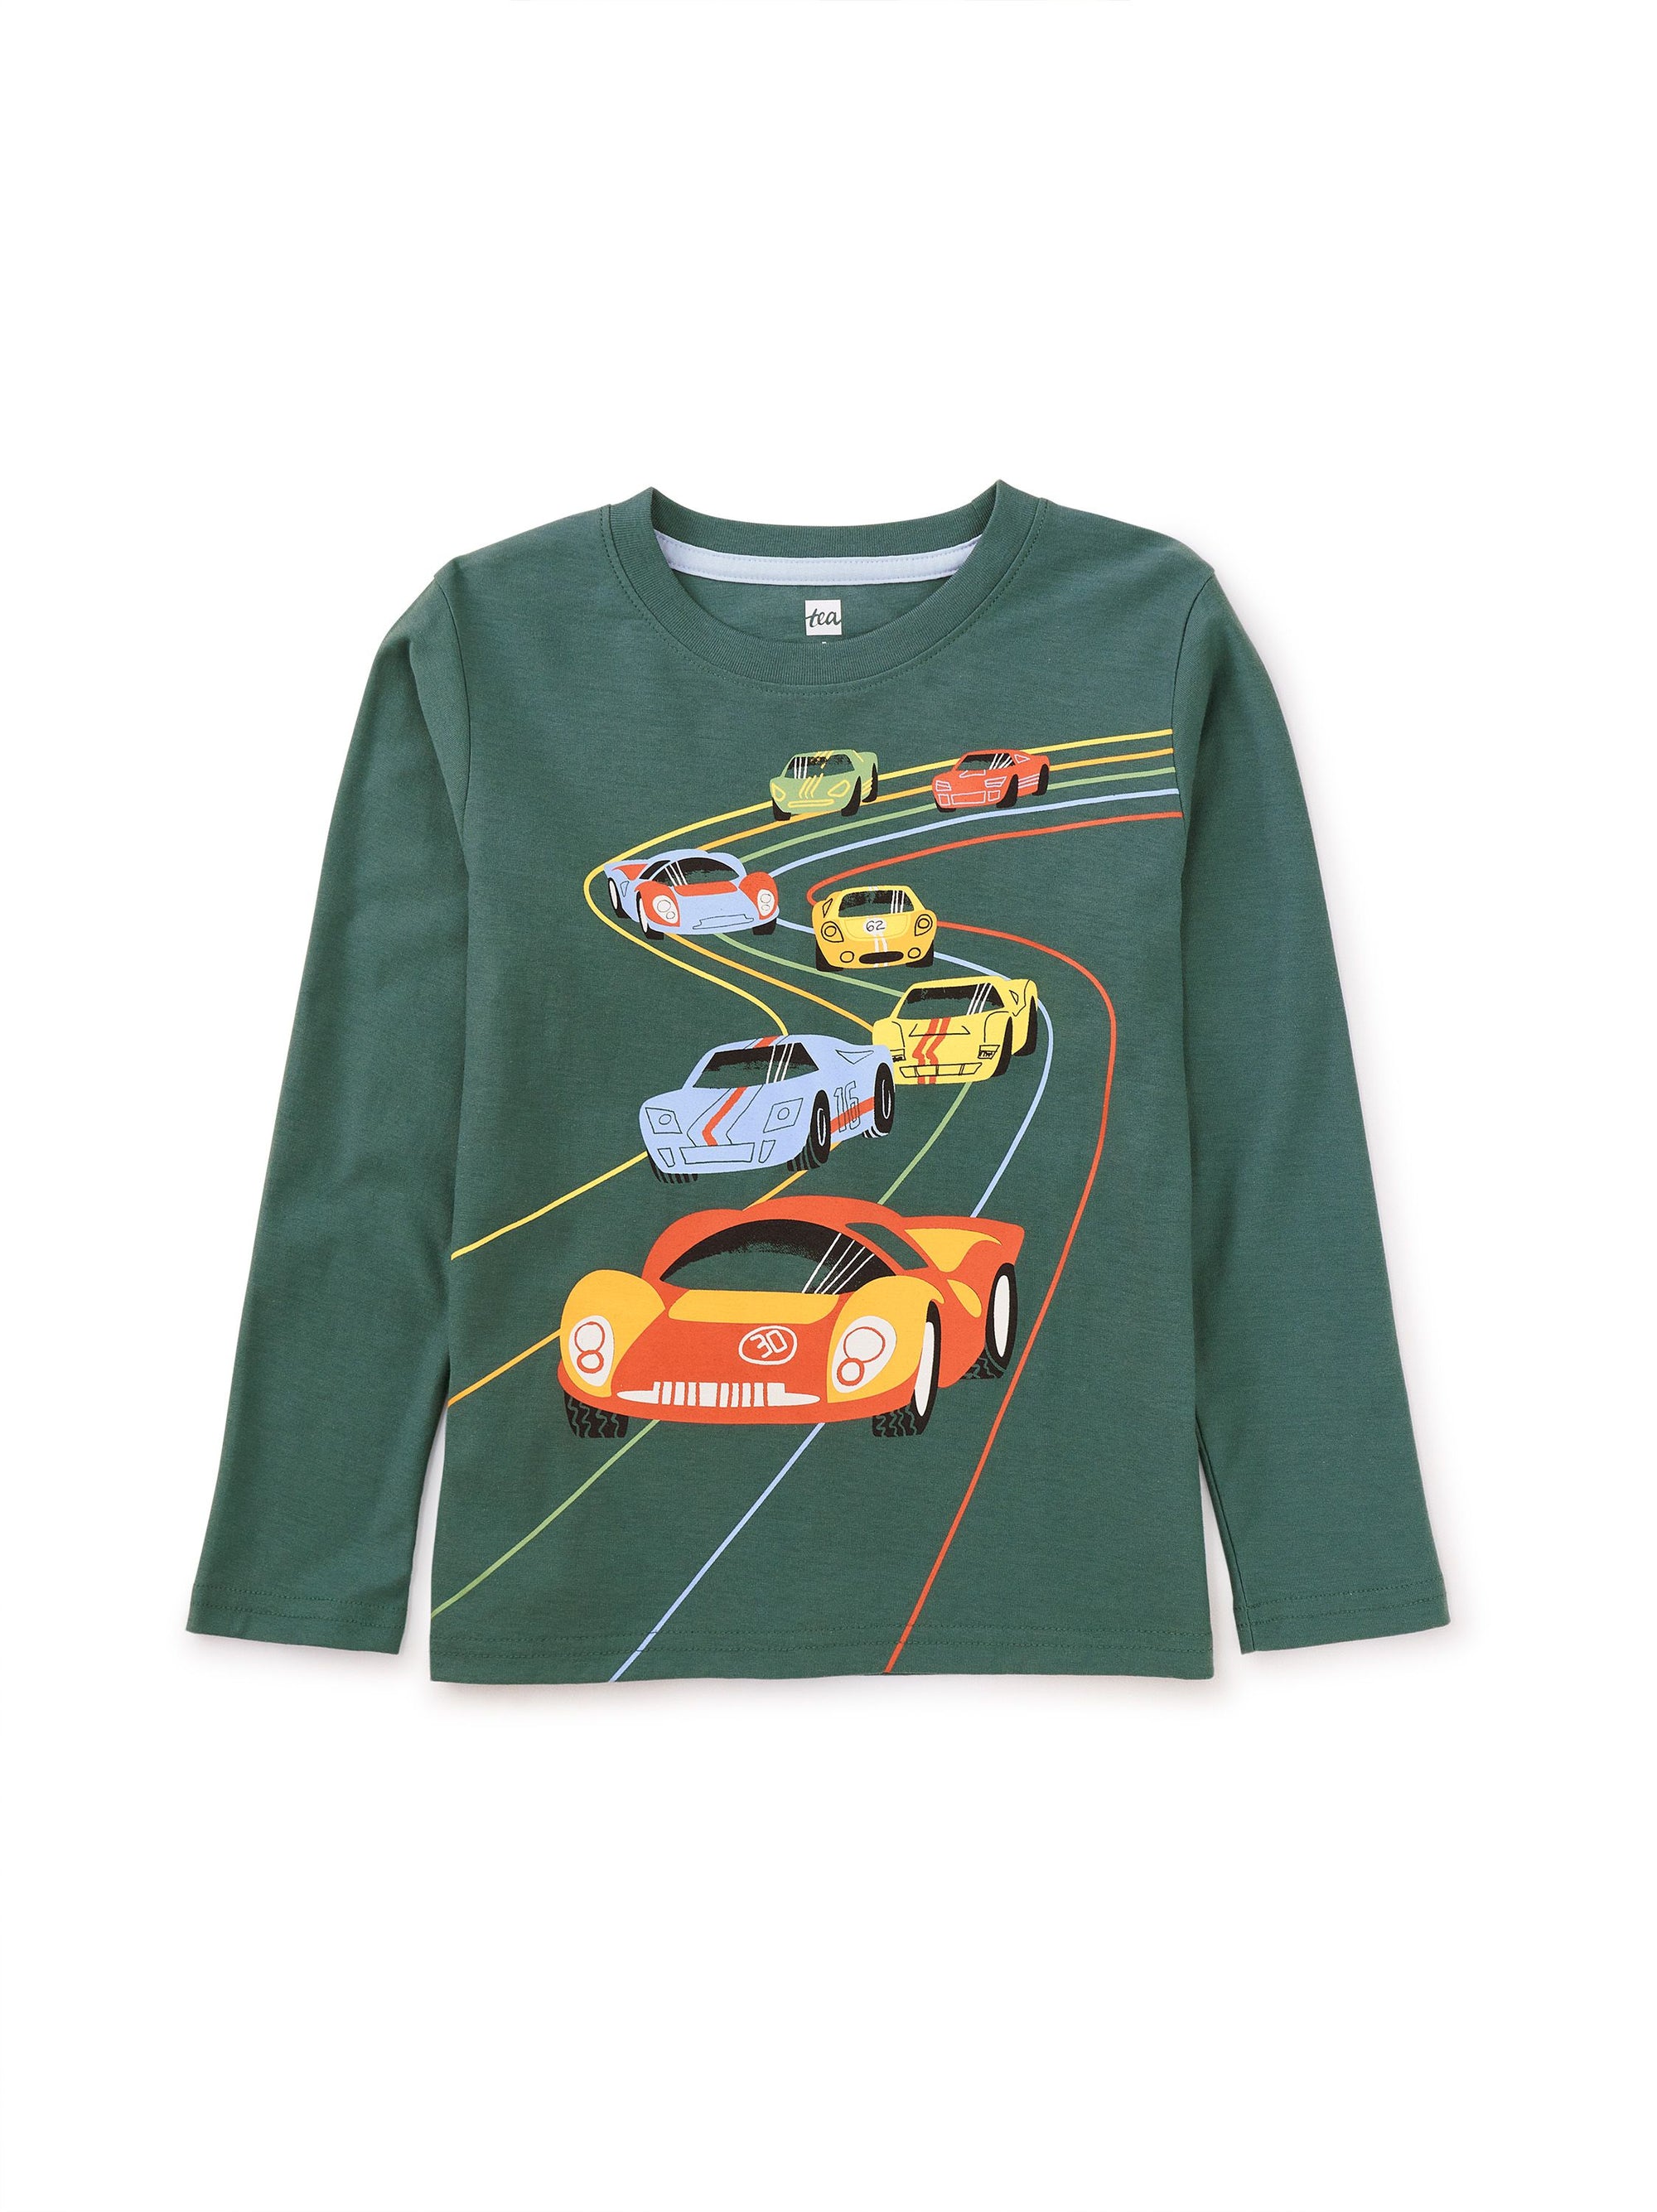 Le Mans Race Graphic Baby Tee - Silver Pine